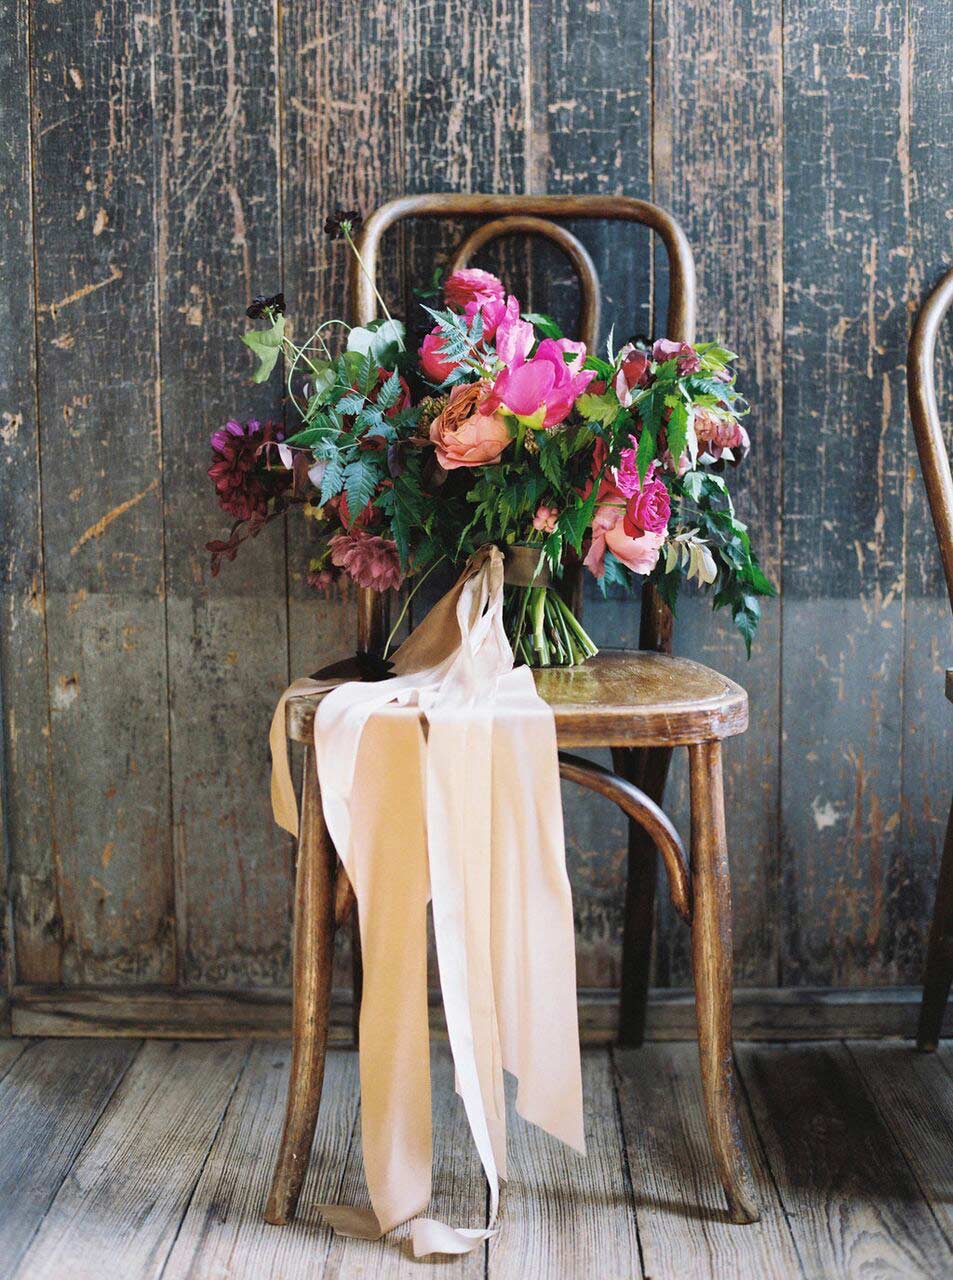 Bridal bouquet with long silk ribbon streamers on wooden chair